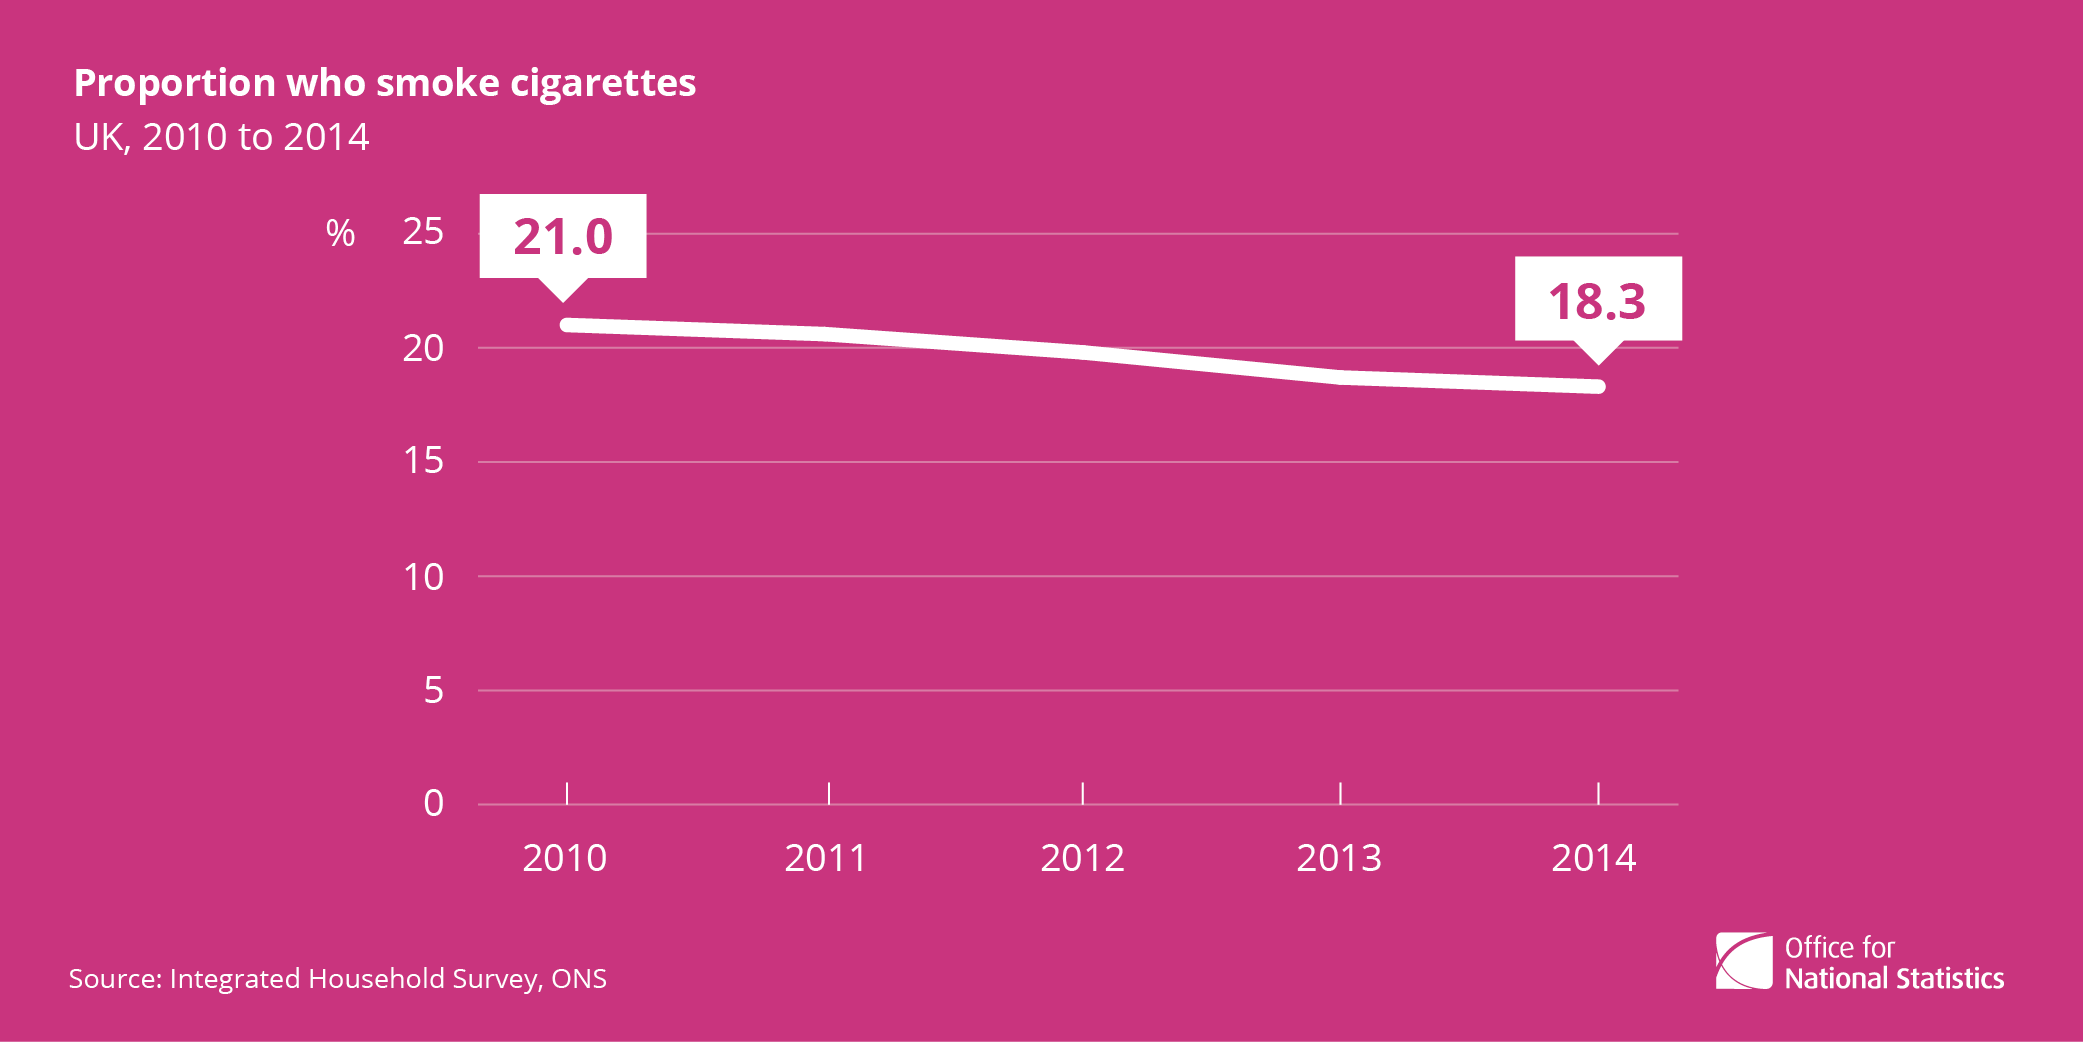 Four facts about smoking in the UK 2014